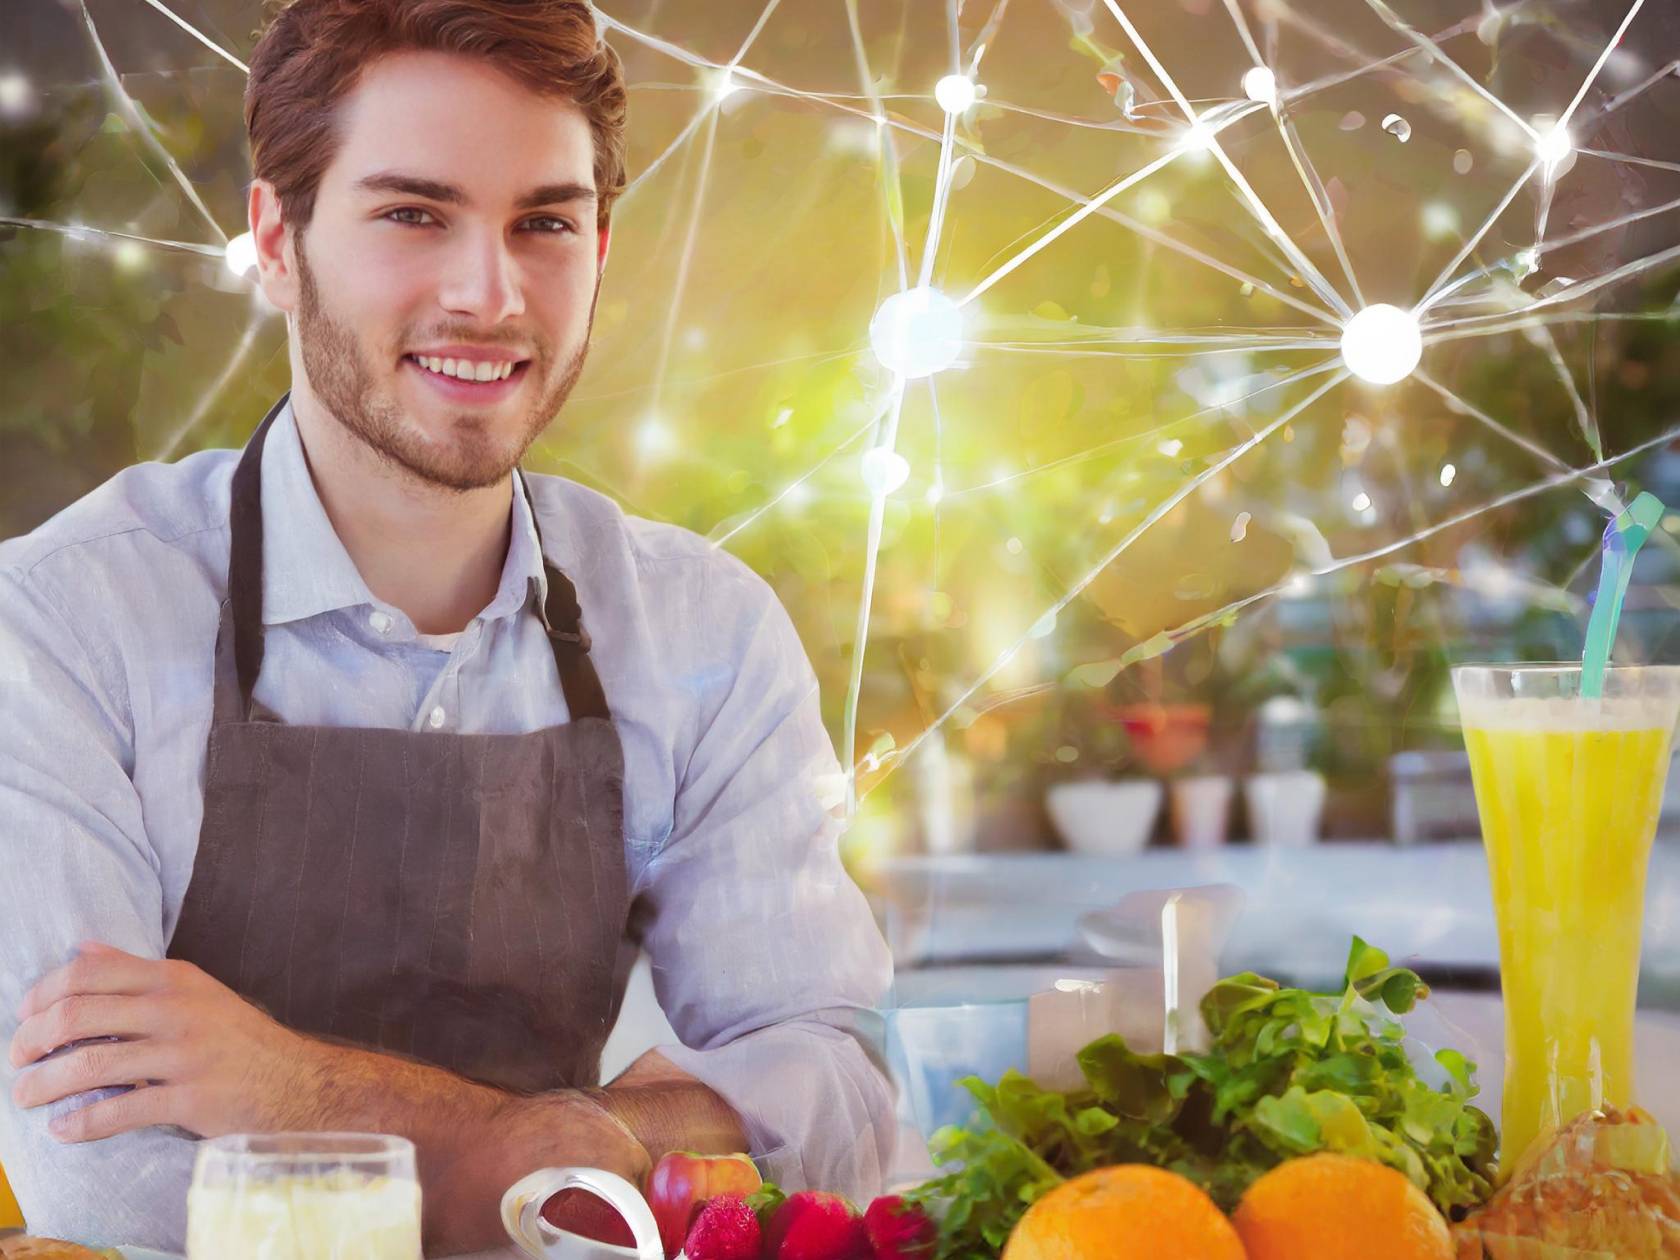 How a connected workforce revolutionizes the food industry